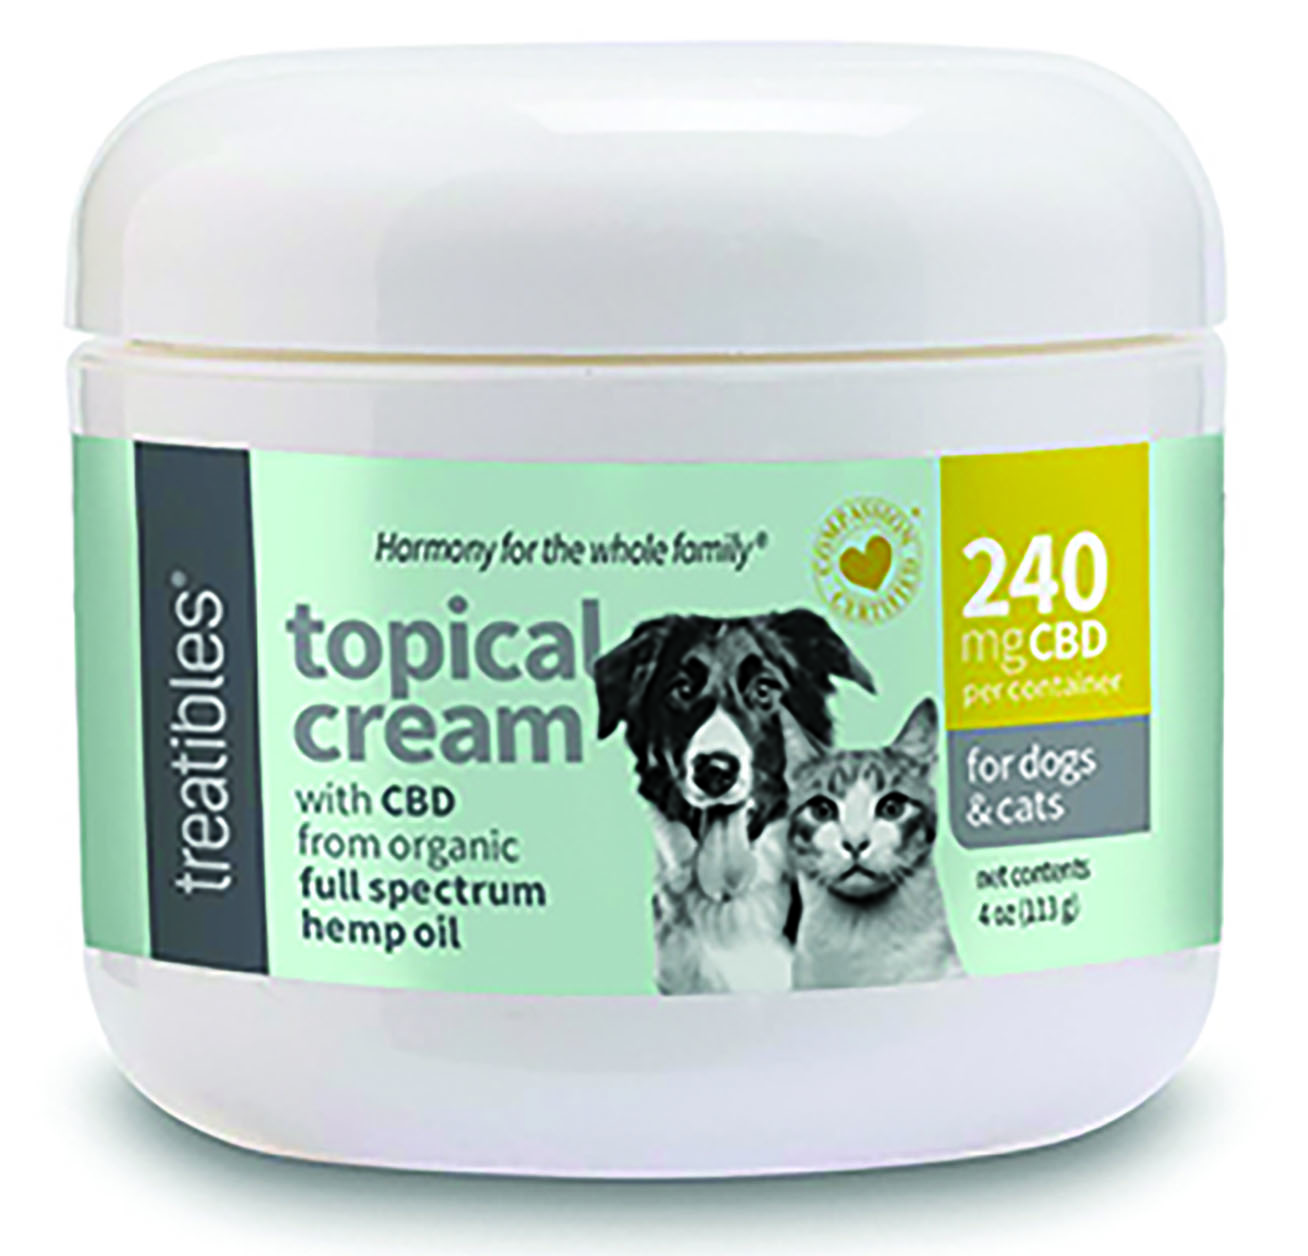 Hemp Oil Topical Cream is formulated with penetrating ingredients for maximum transdermal absorption. It is ideal for managing joint inflammation, burns, scratches and other minor skin conditions.